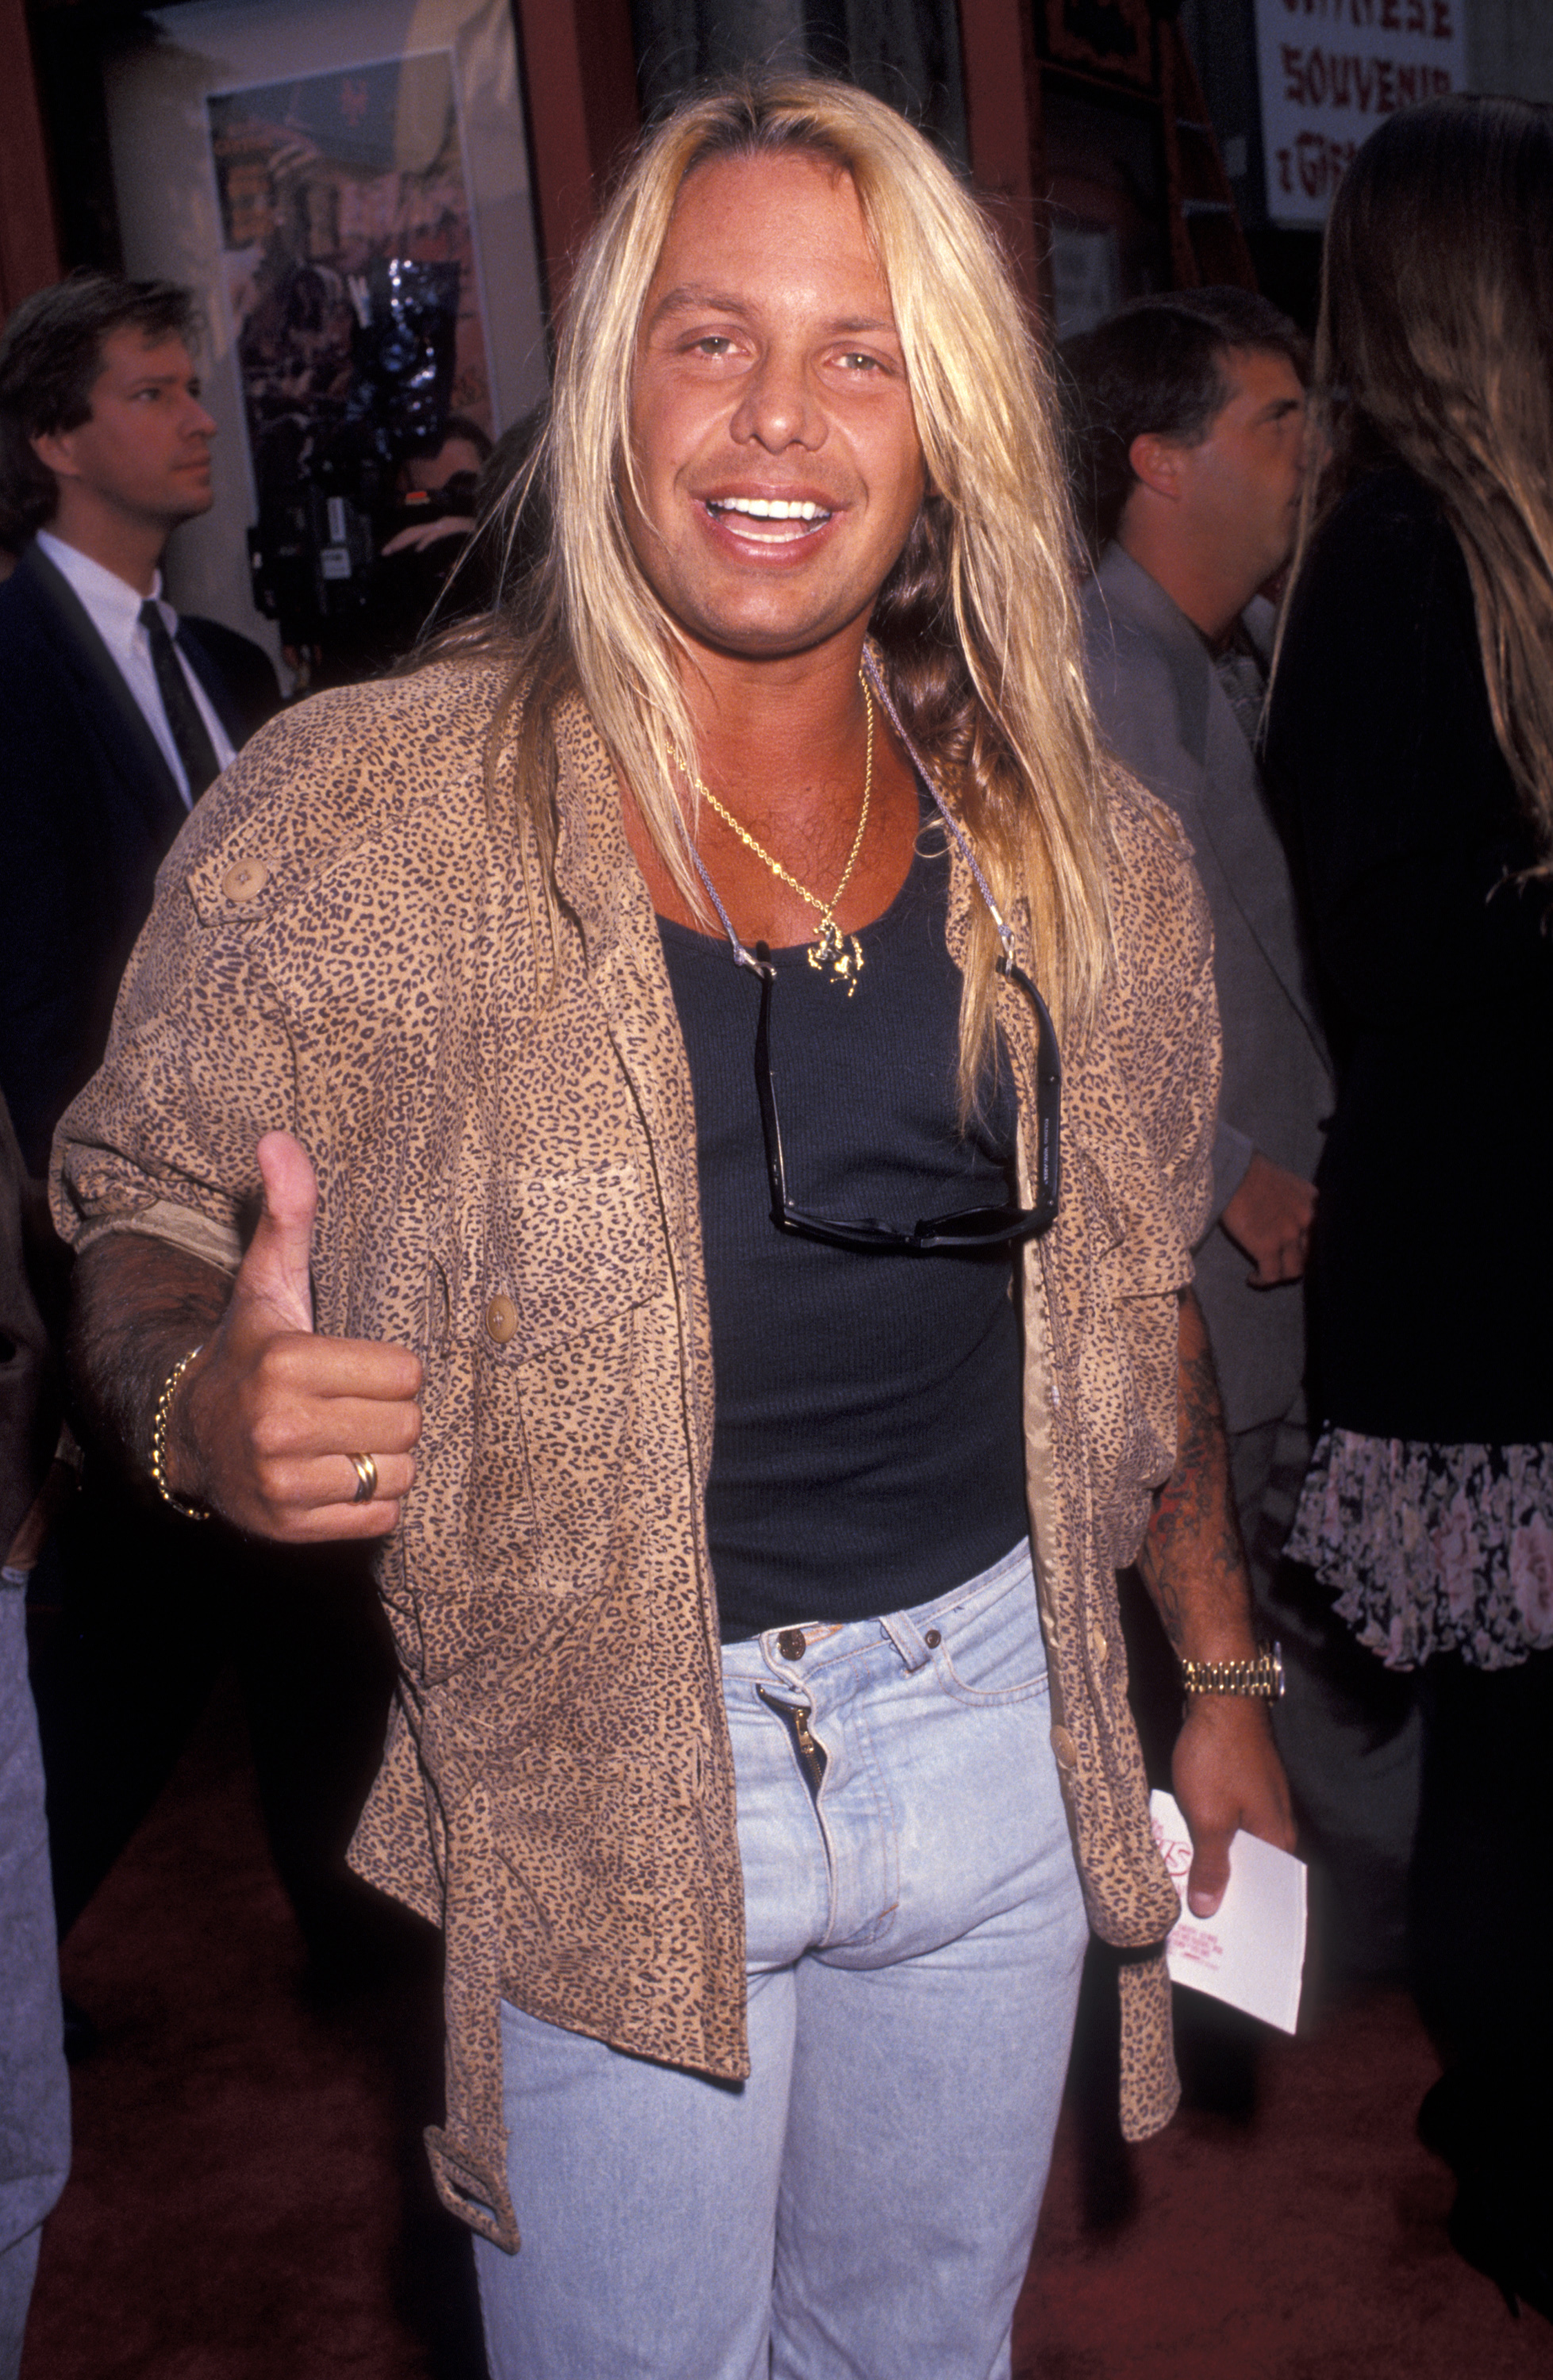 Vince Neil at "Bill & Ted's Bogus Journey" Hollywood Premiere on July 11, 1991, in Hollywood, California. | Source: Getty Images